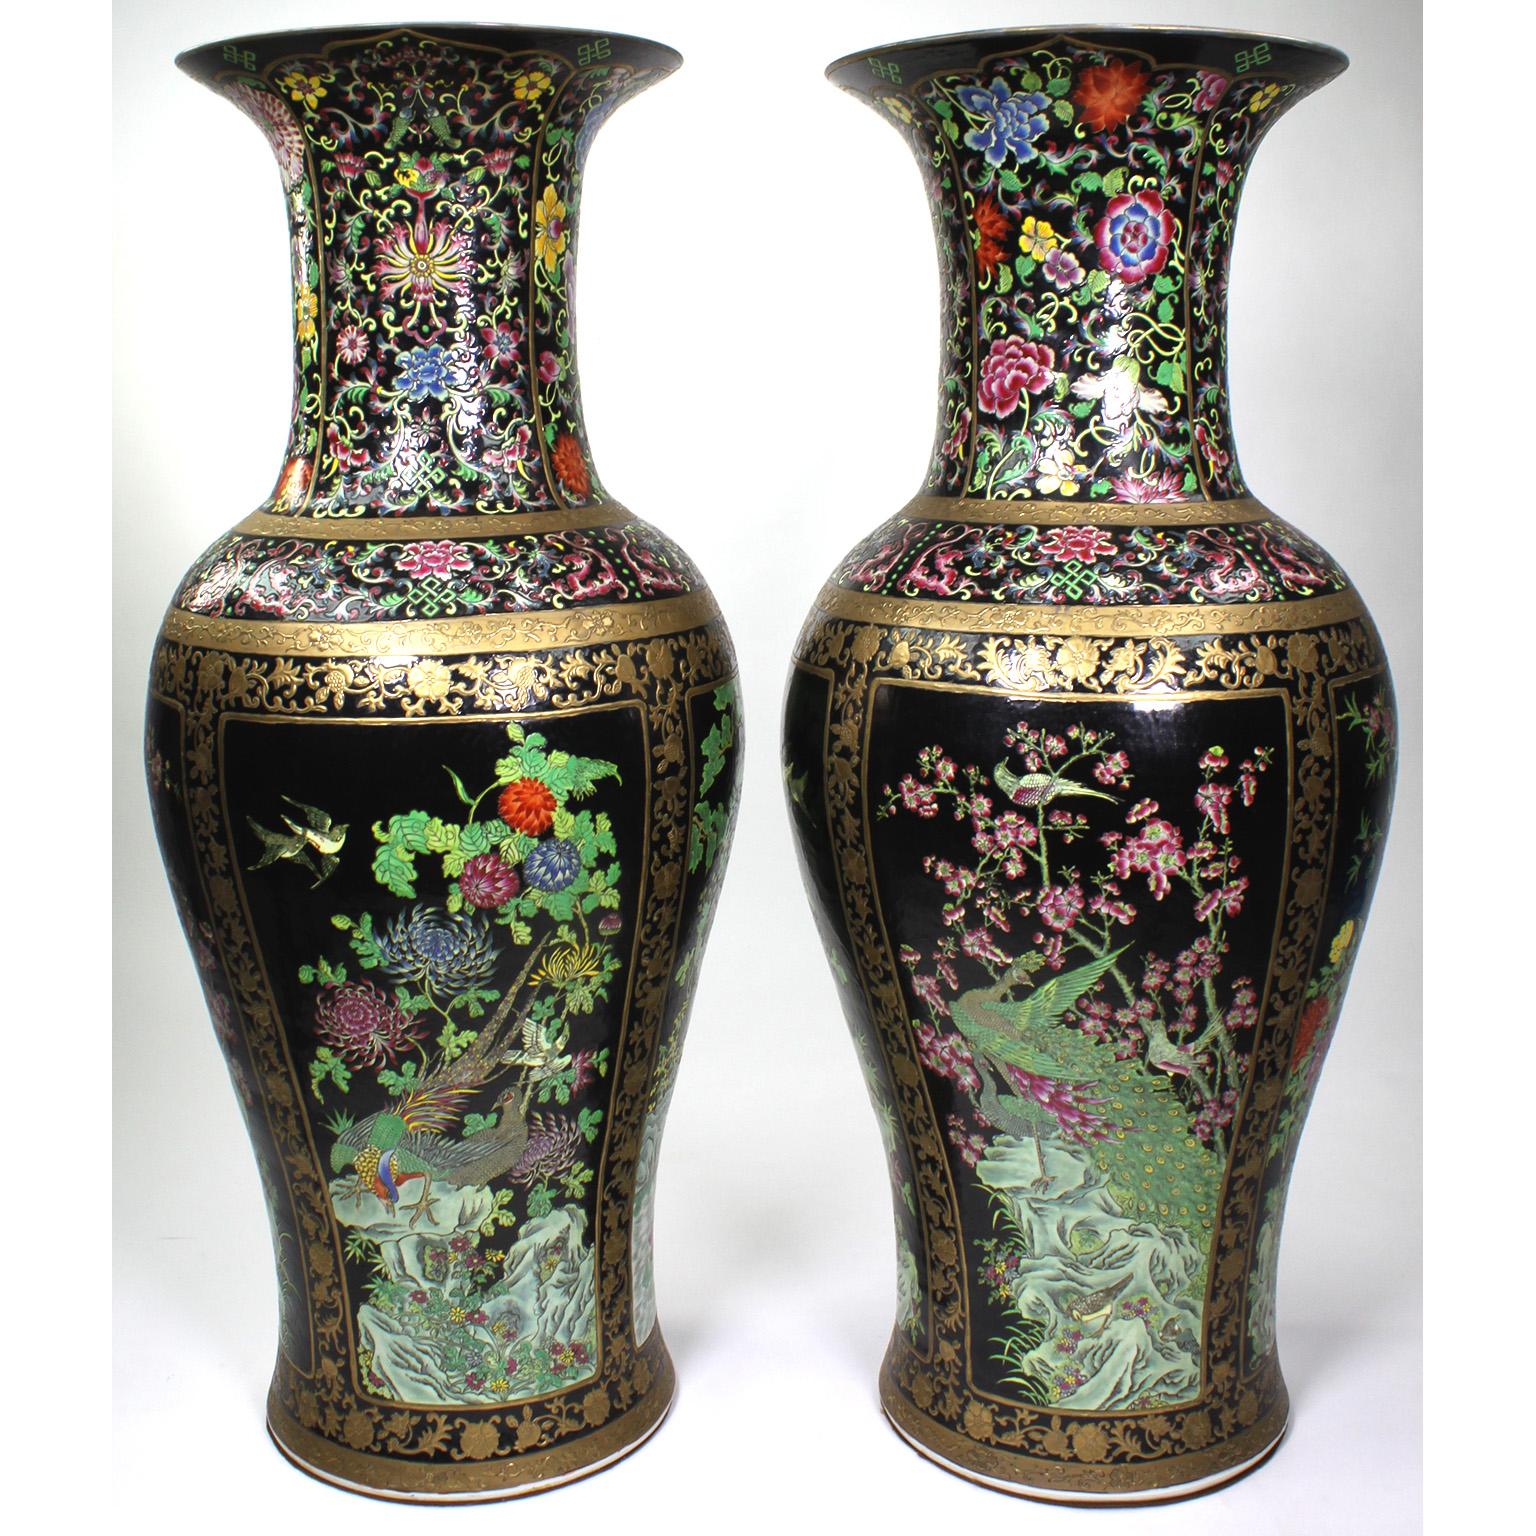 A Pair of Tall Chinese export porcelain figural vases. The ovoid porcelain bodies decorated with colorful flowers, tropical birds, trees, lilies and a pond, with a parcel-gilt trim and black background. Unsigned-unmarked. Circa: Mid to late 20th